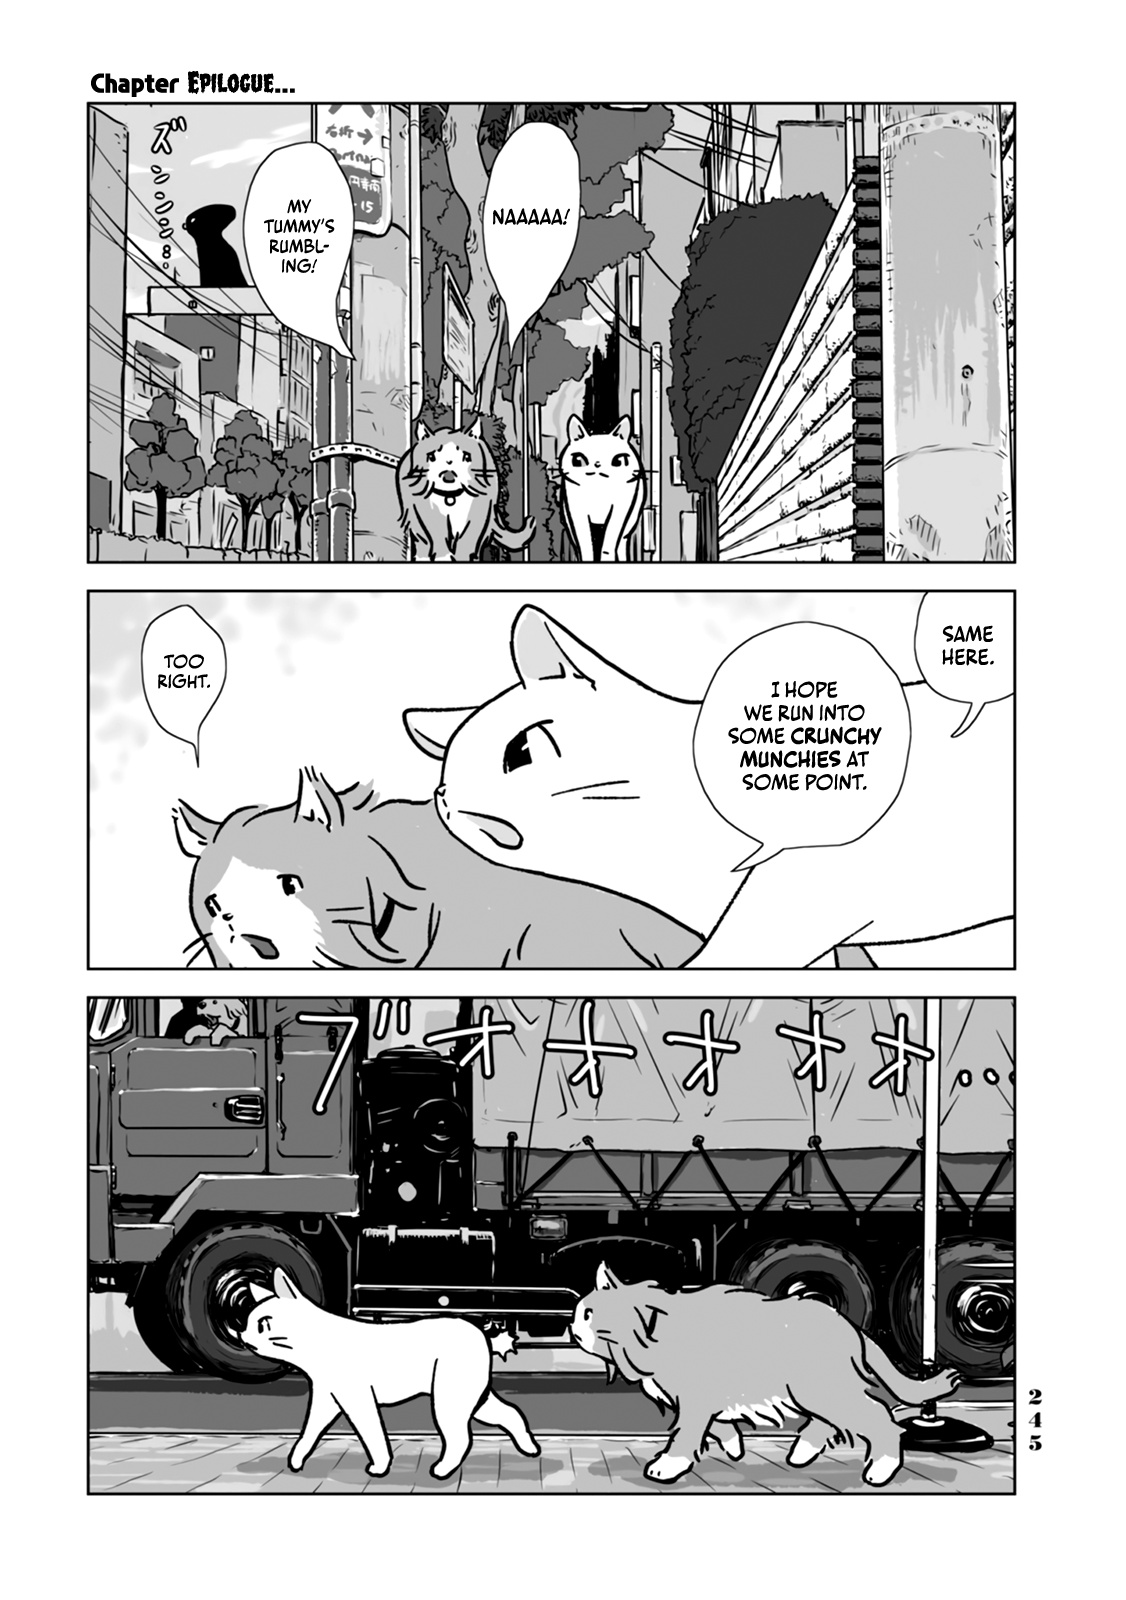 No Cats Were Harmed In This Comic. - Page 1